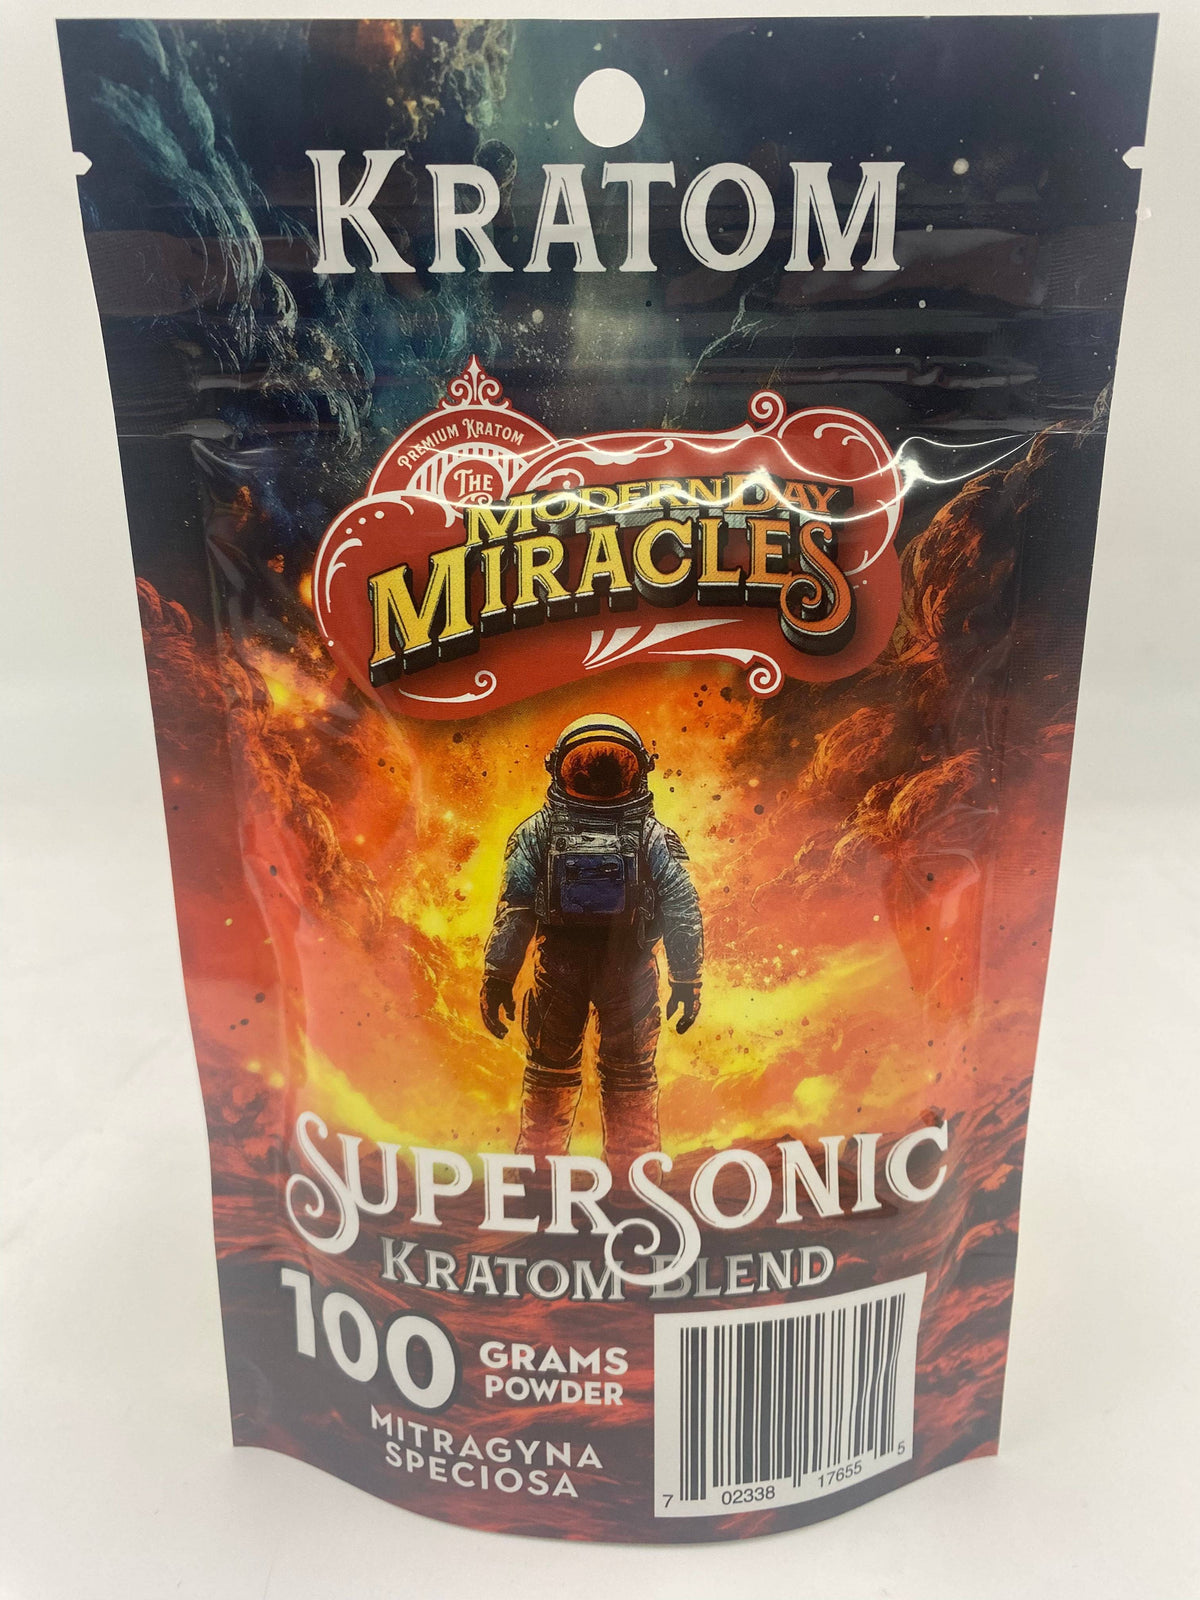 Modern Day Miracles Space Blends- Supersonic Red Kratom Borneo Blend 100 Gram Powder